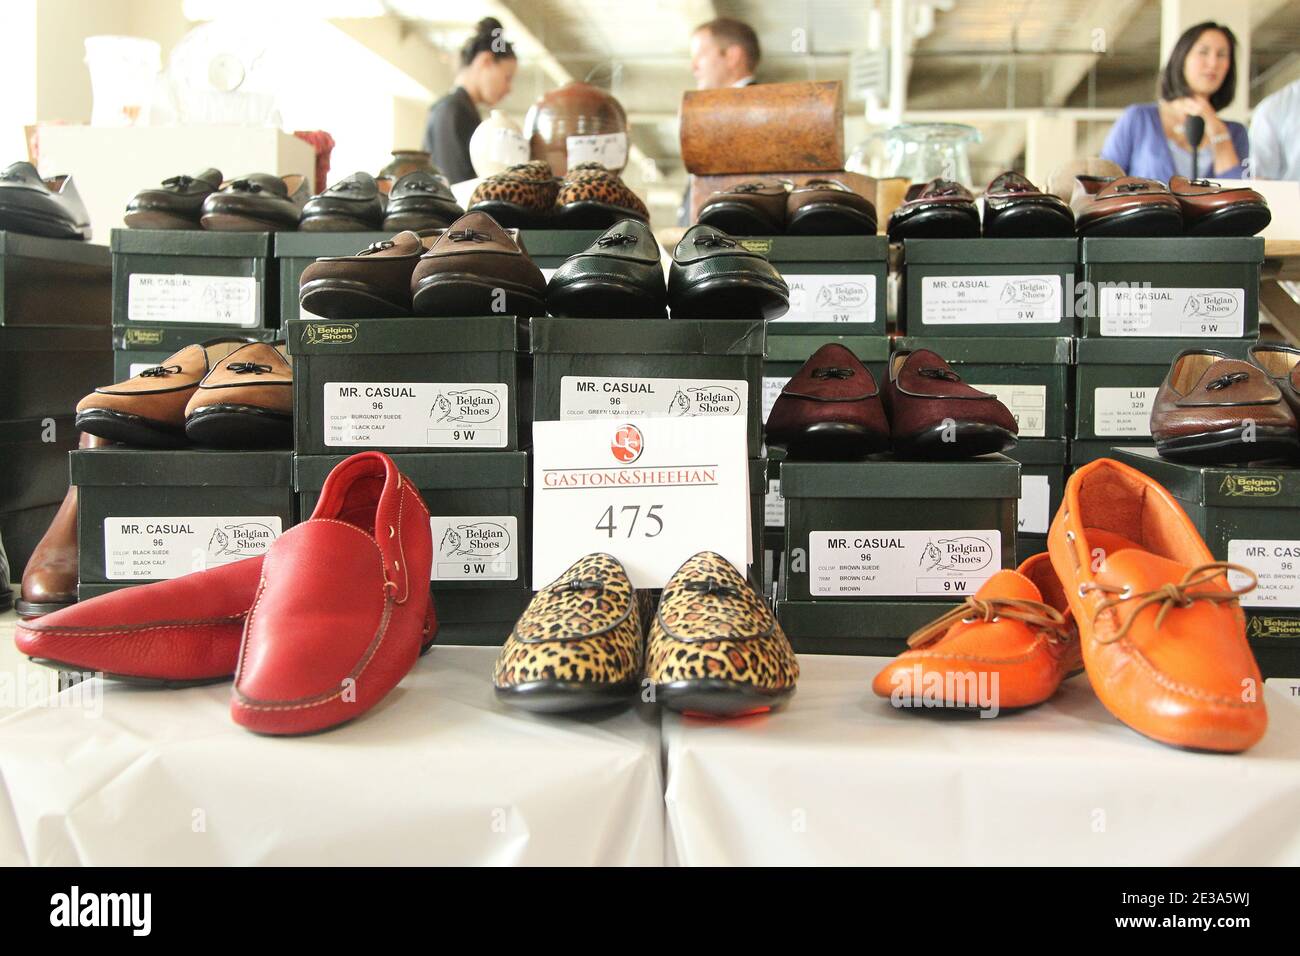 Shoes are displayed during a press preview of a U.S. Marshals Service auction of personal property seized from Bernard and Ruth Madoff in New York City, NY, USA on November 10, 2010. Photo by Elizabeth Pantaleo/ABACAPRESS.COM Stock Photo